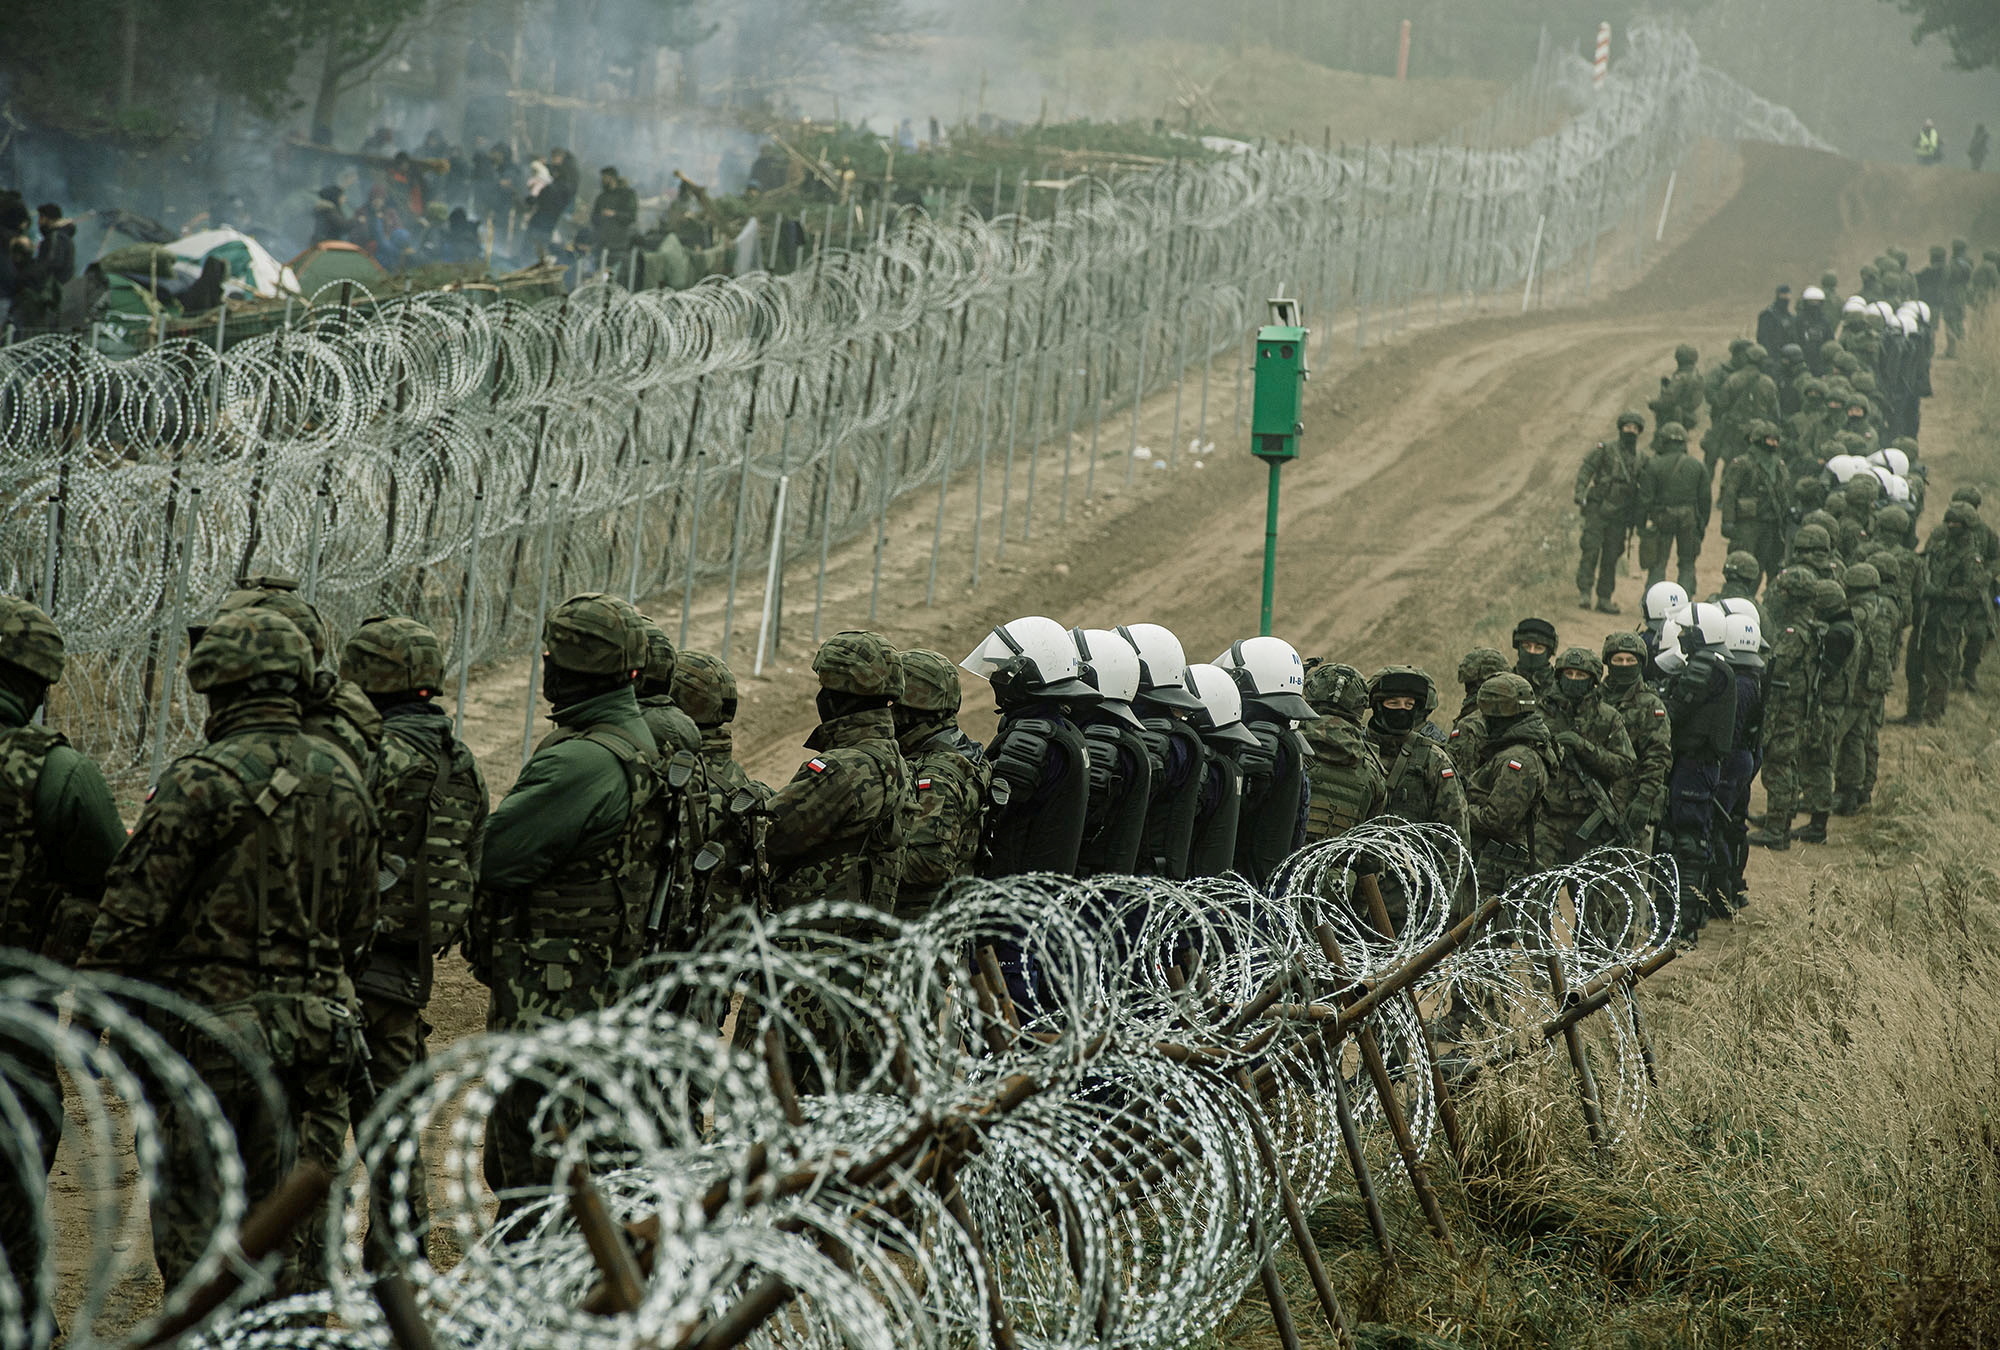 Polish soldiers and police watch migrants at the Poland/Belarus border near Kuznica